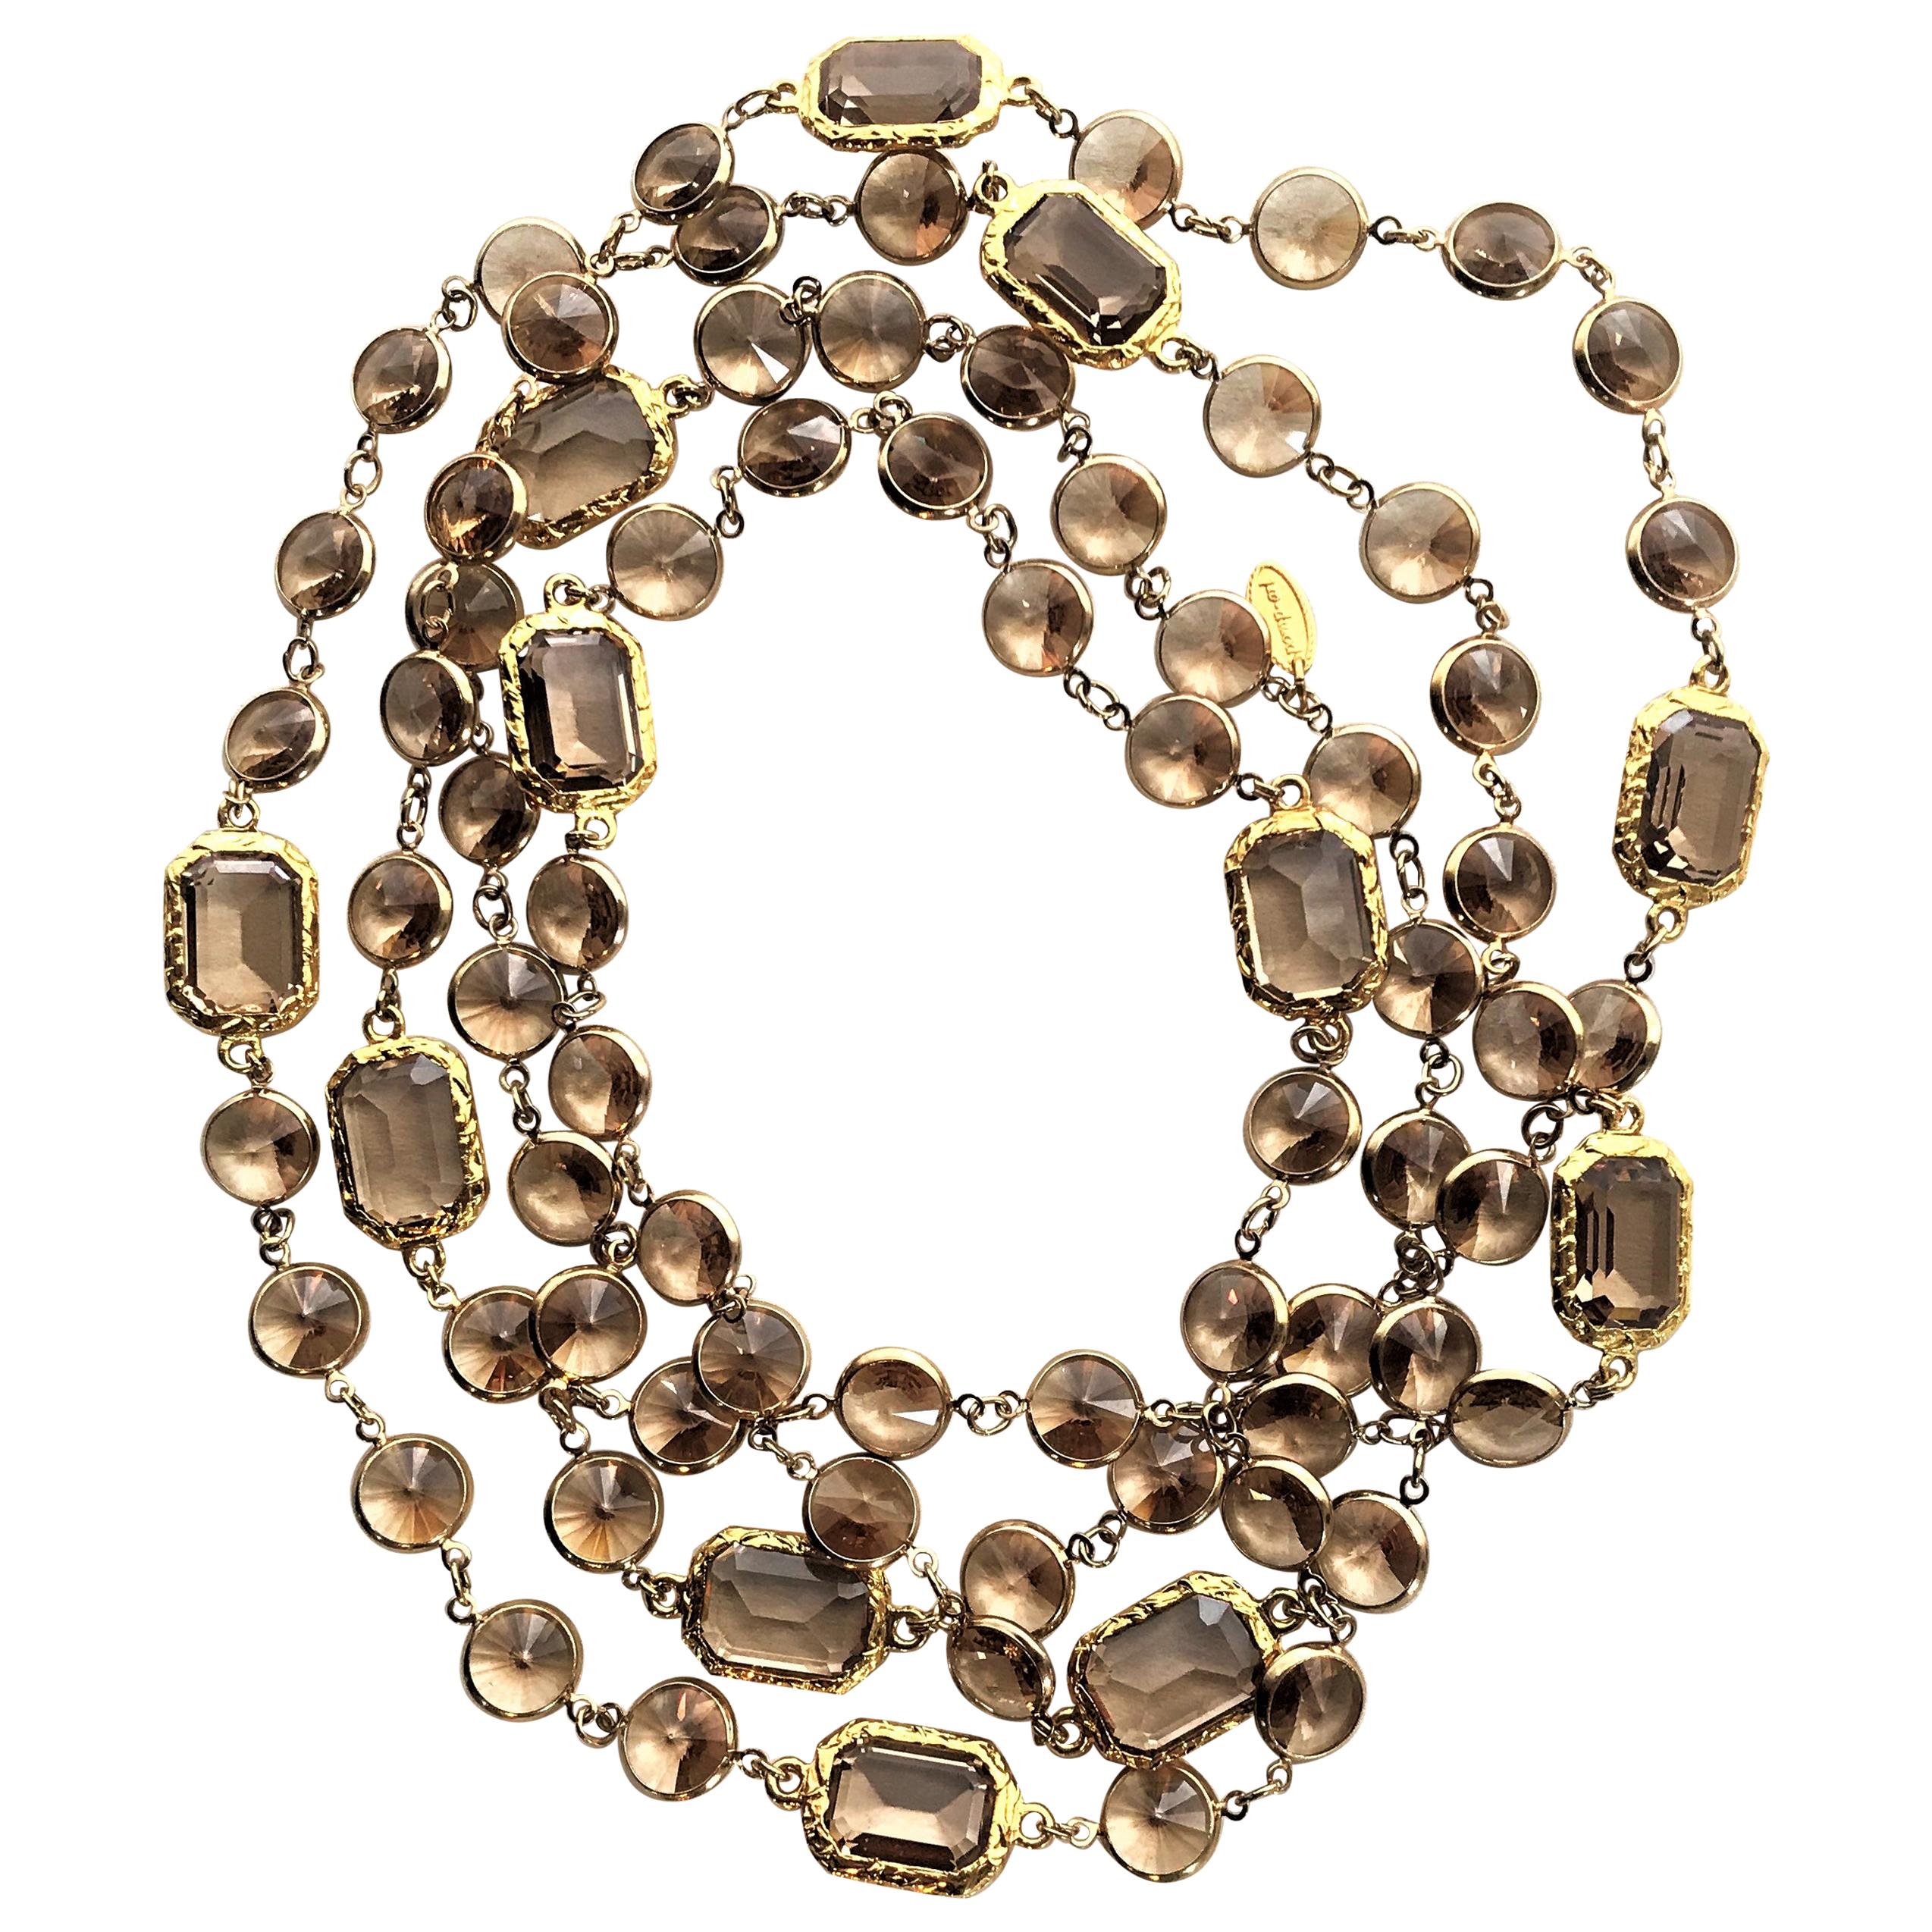 A new long Chicklet necklace like the Chanel, Swarovski crystals gold plated 